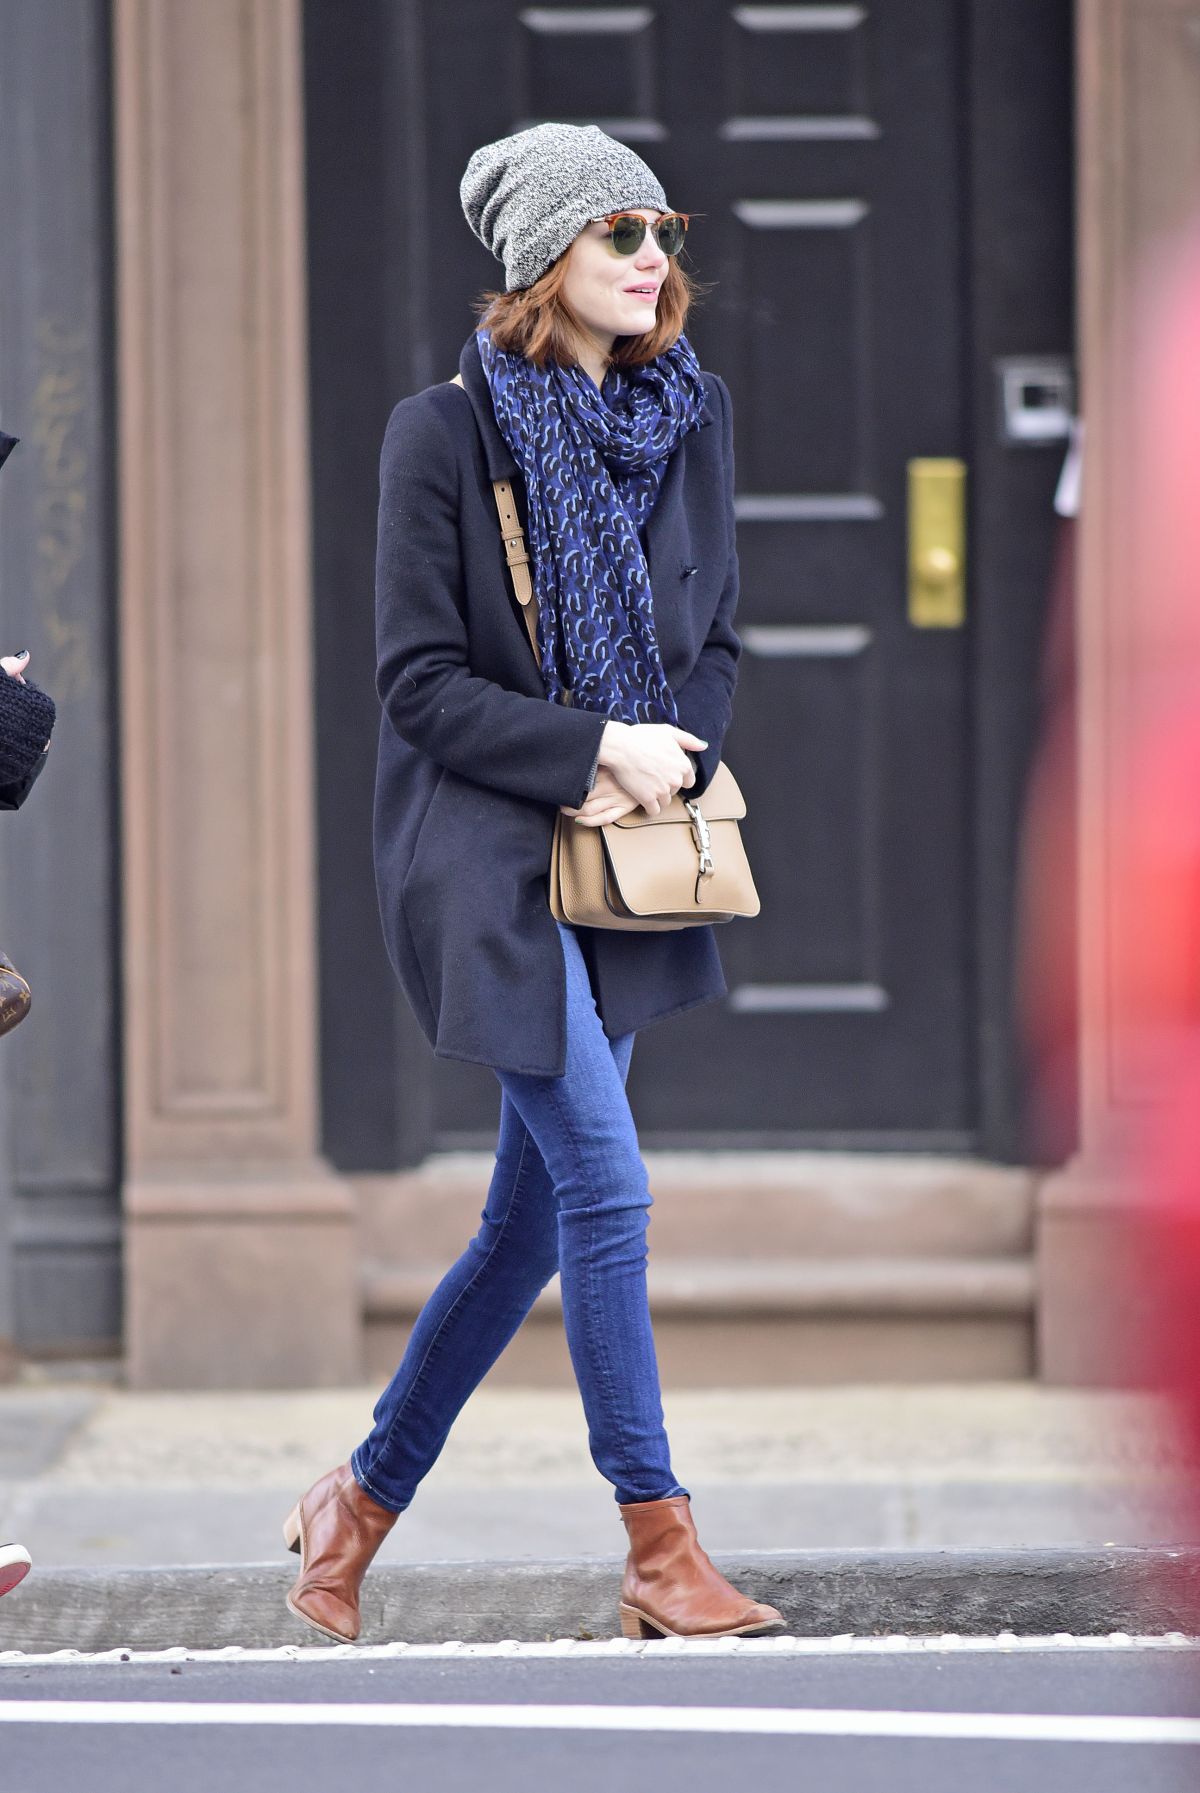 EMMA STONE in Jeans Out and About in New York – HawtCelebs